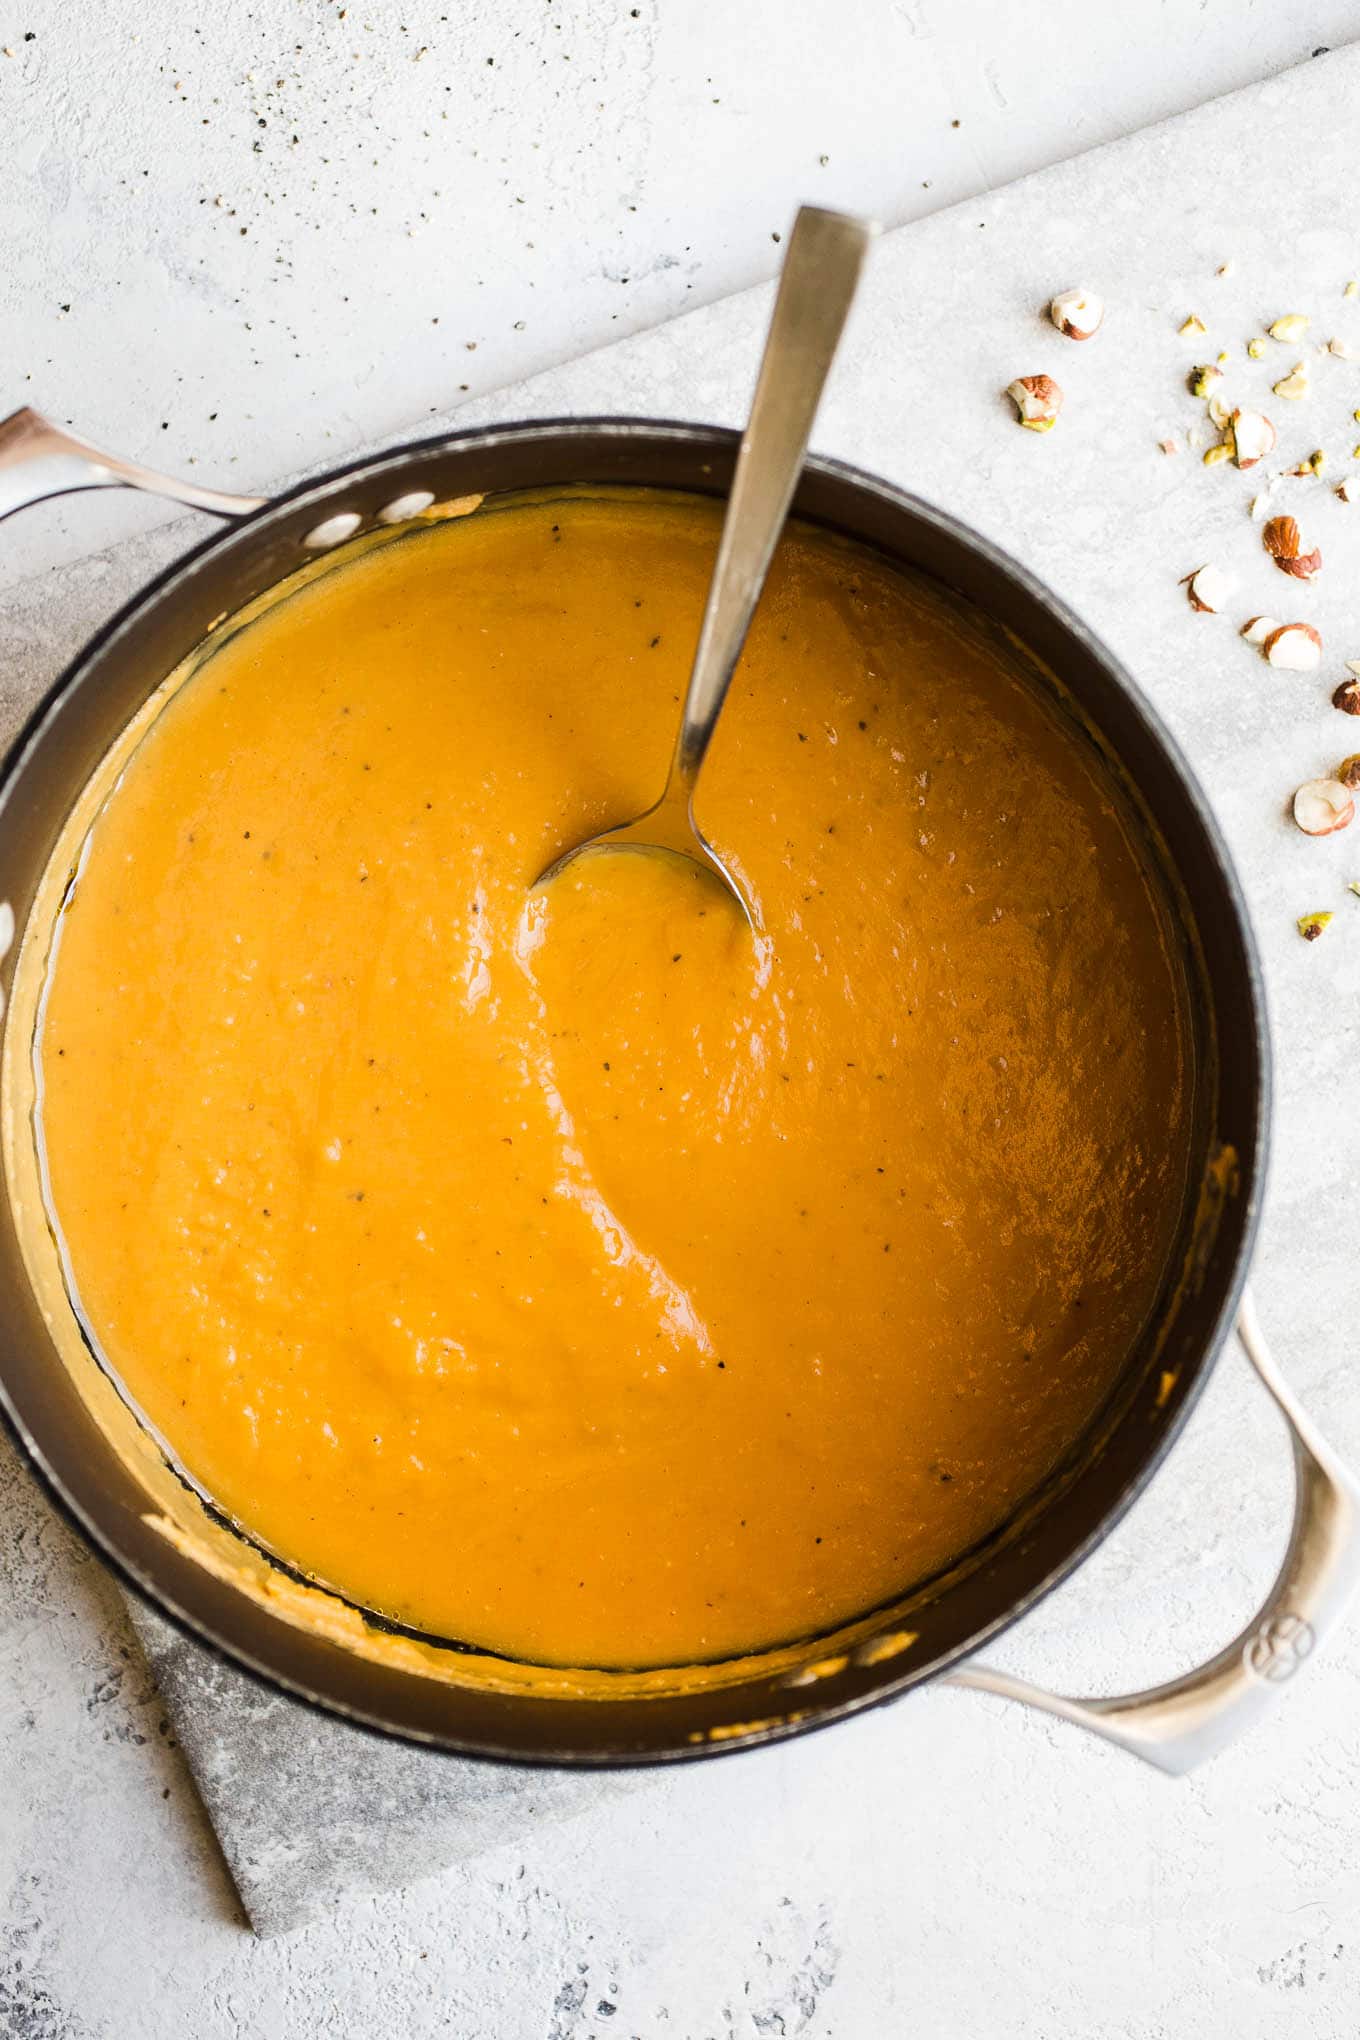 Creamy Vegan Sweet Potato Soup is gluten-free and ready in just 30 minutes. Made with minimal ingredients and warming spices for a spicy sweet soup.